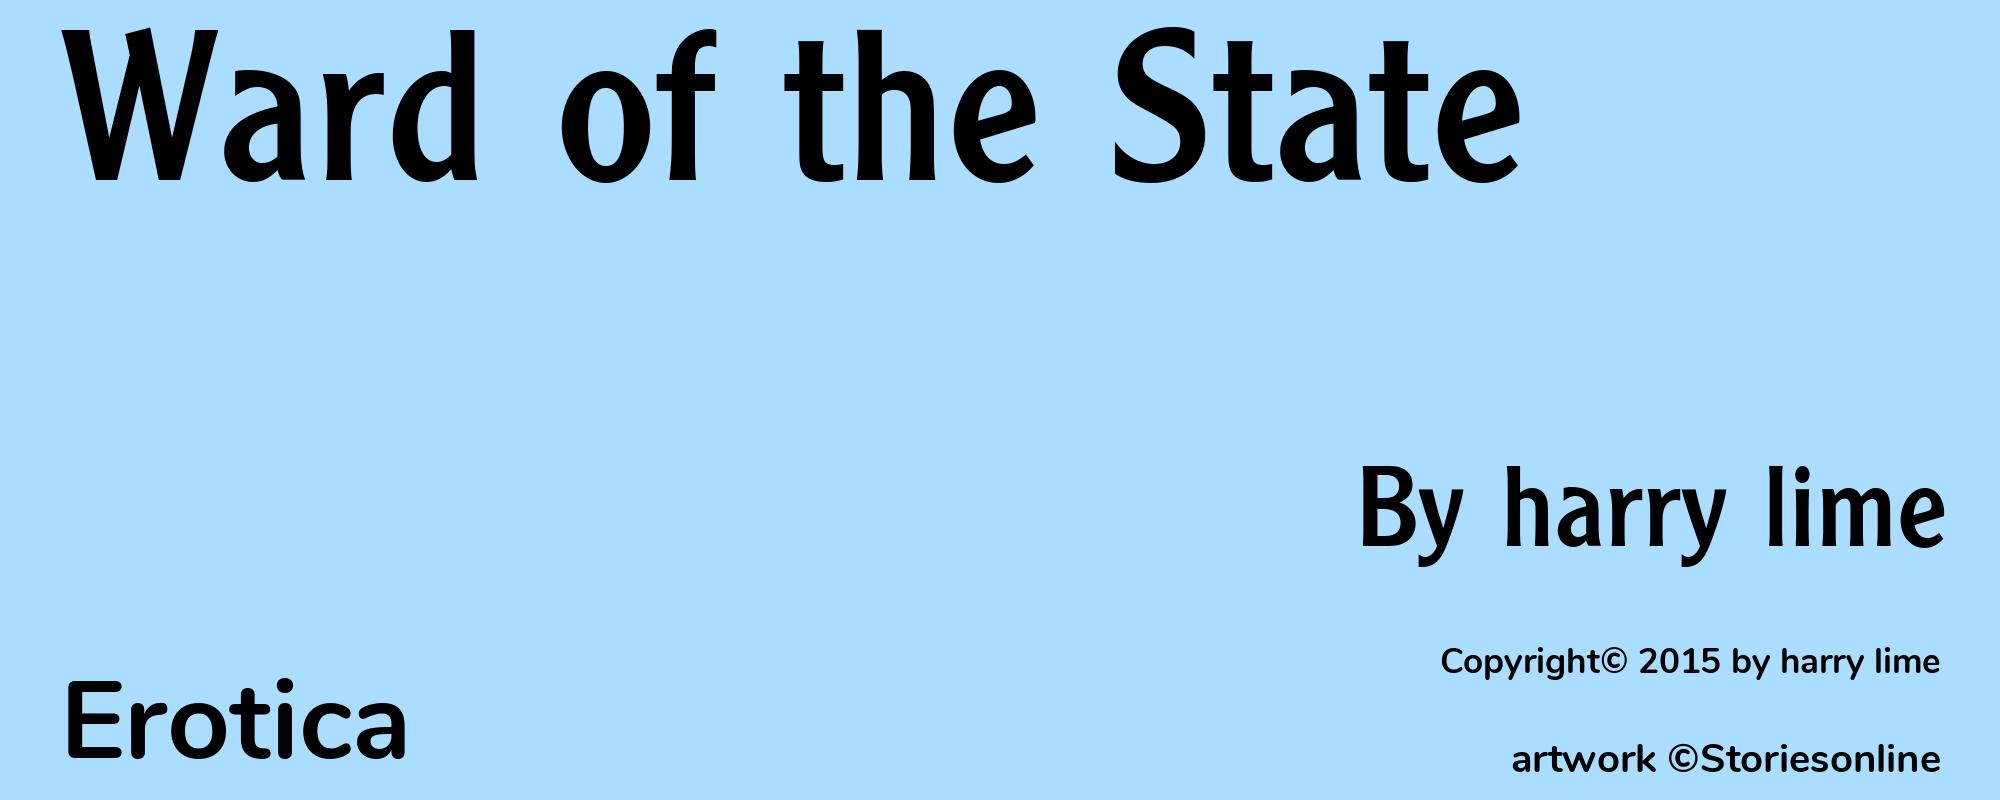 Ward of the State - Cover